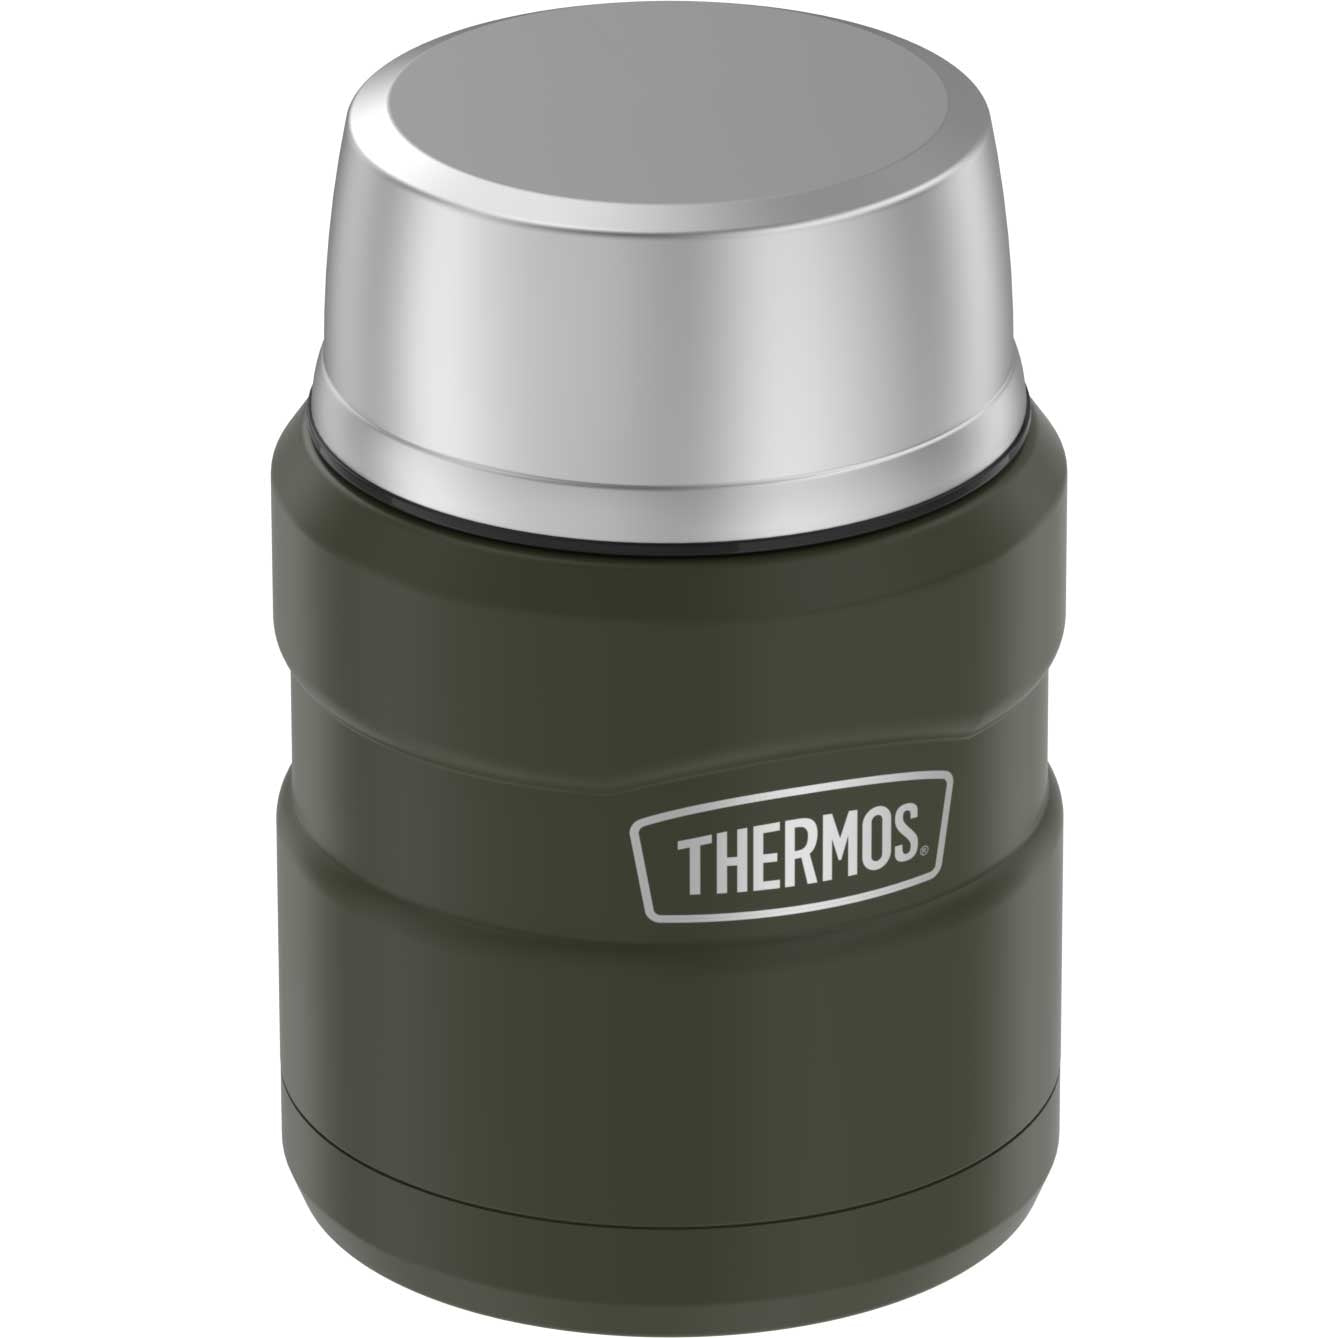 Thermos Sipp Stainless Steel Food Jar, Stainless Steel. 16 Ounce